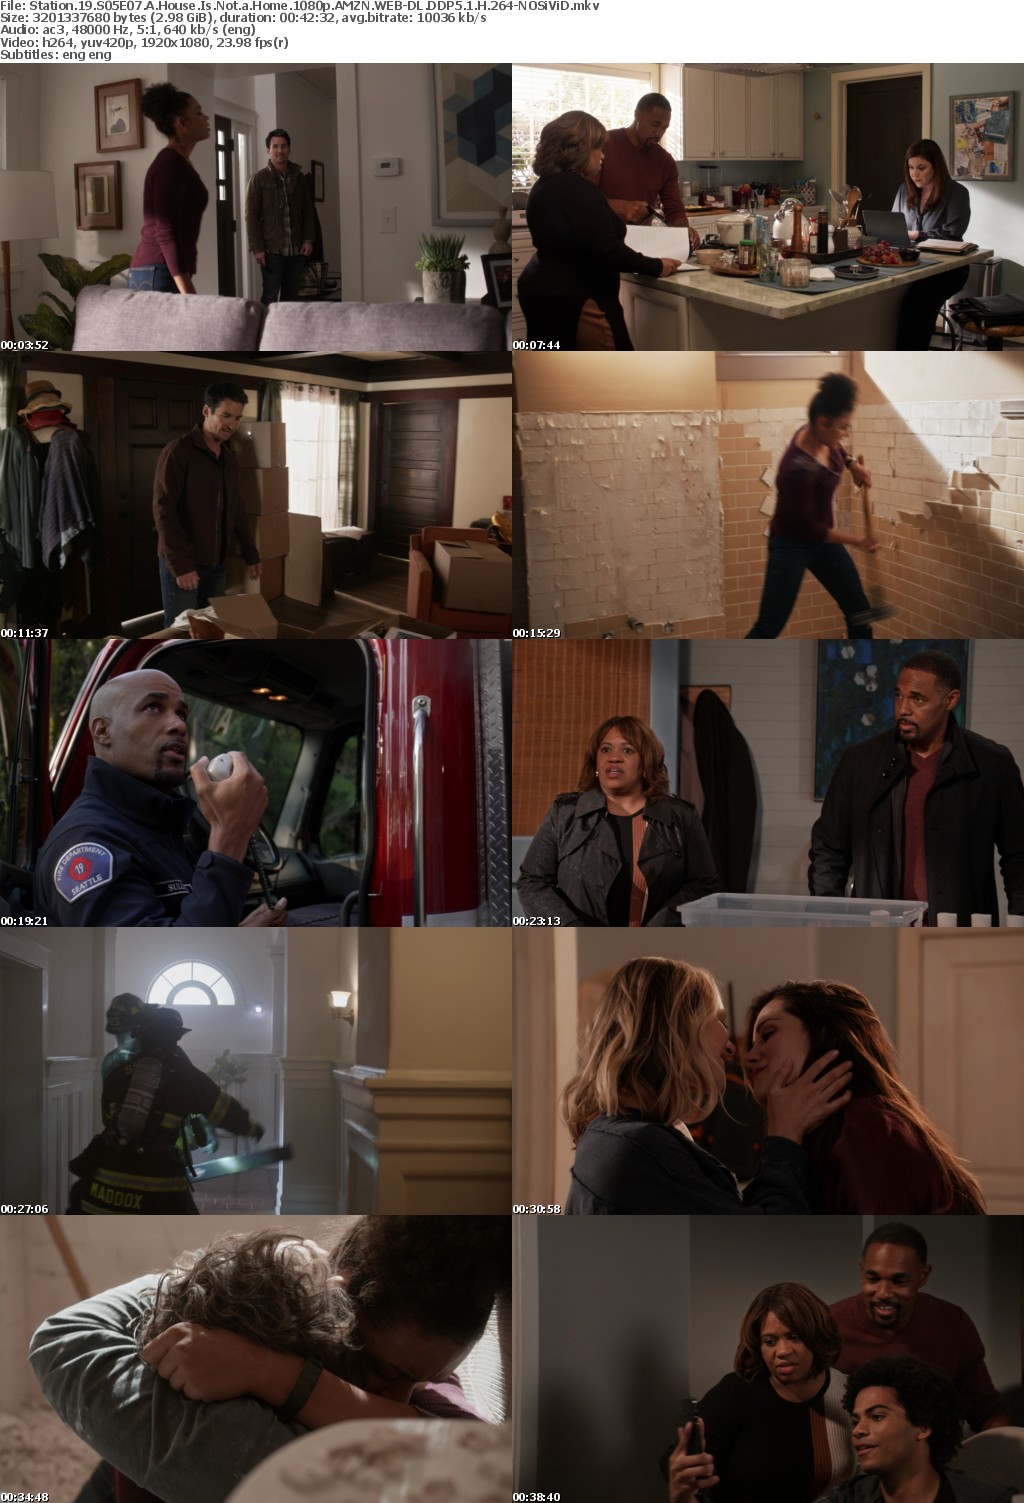 Station 19 S05E07 A House Is Not a Home 1080p AMZN WEBRip DDP5 1 x264-NOSiViD